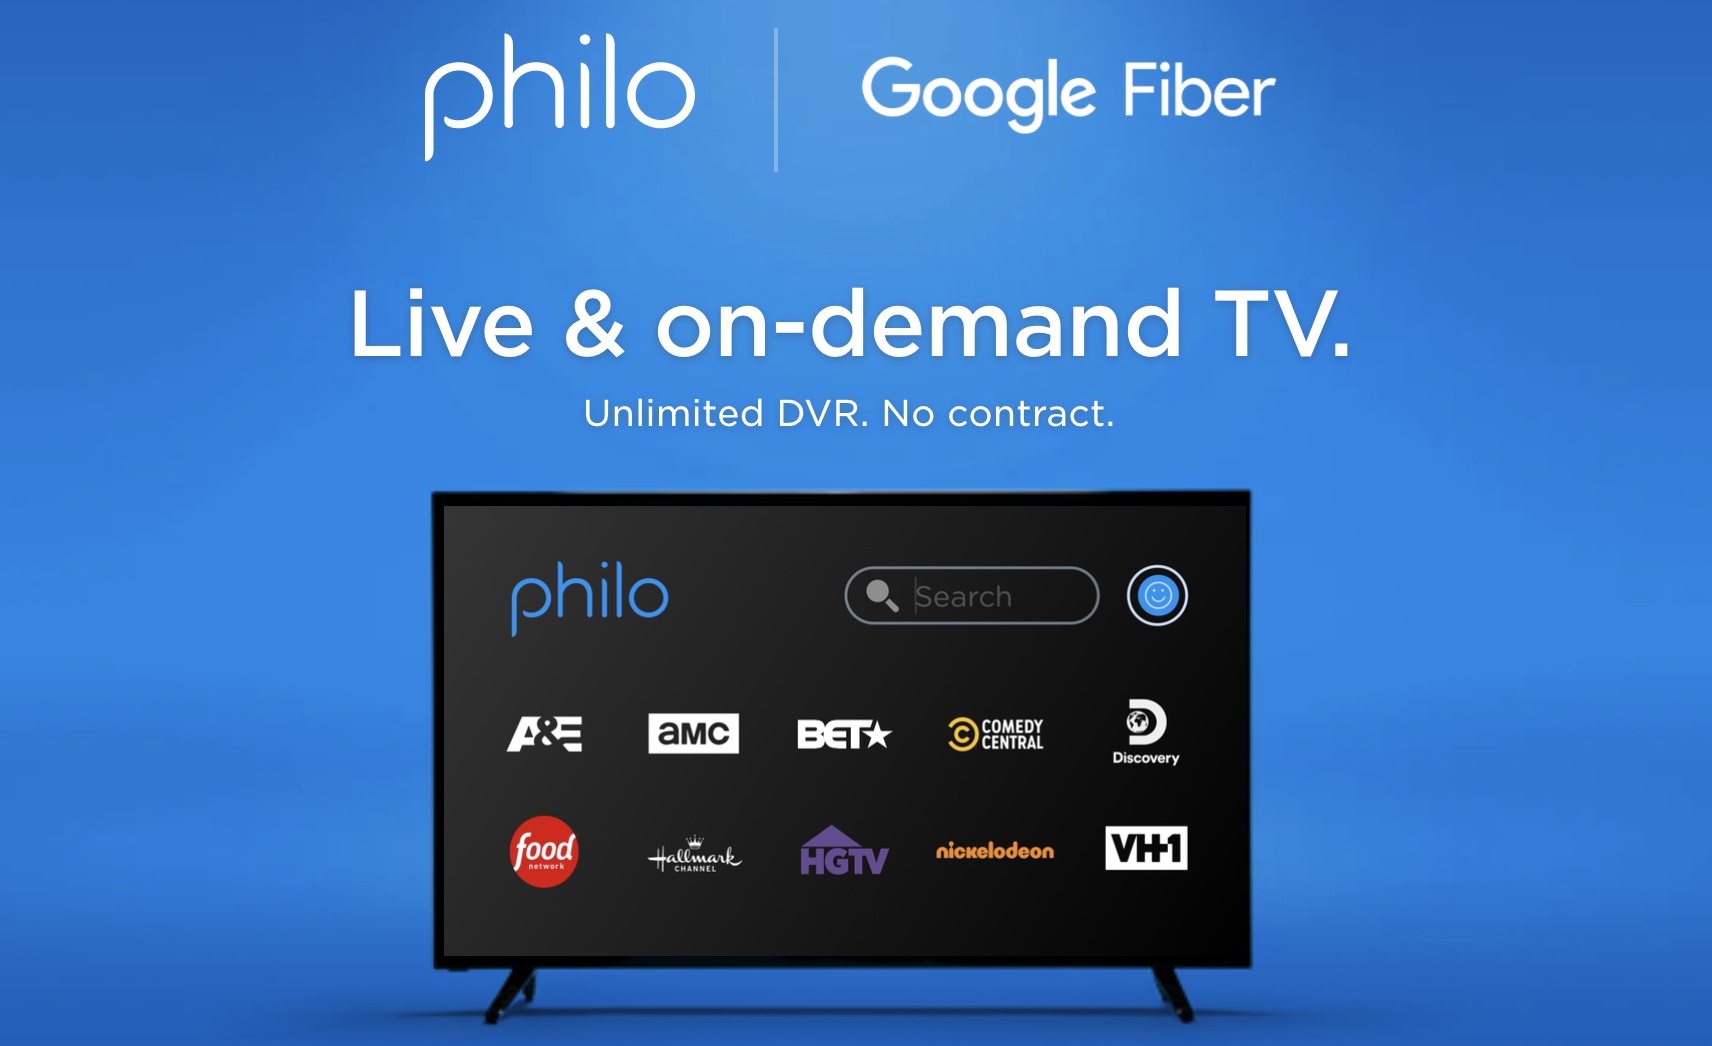 Google Fiber Adds Philo Streaming As An Option Next To Youtube And Fubo Wilson S Media - roblox trading on trade hangout sped up youtube